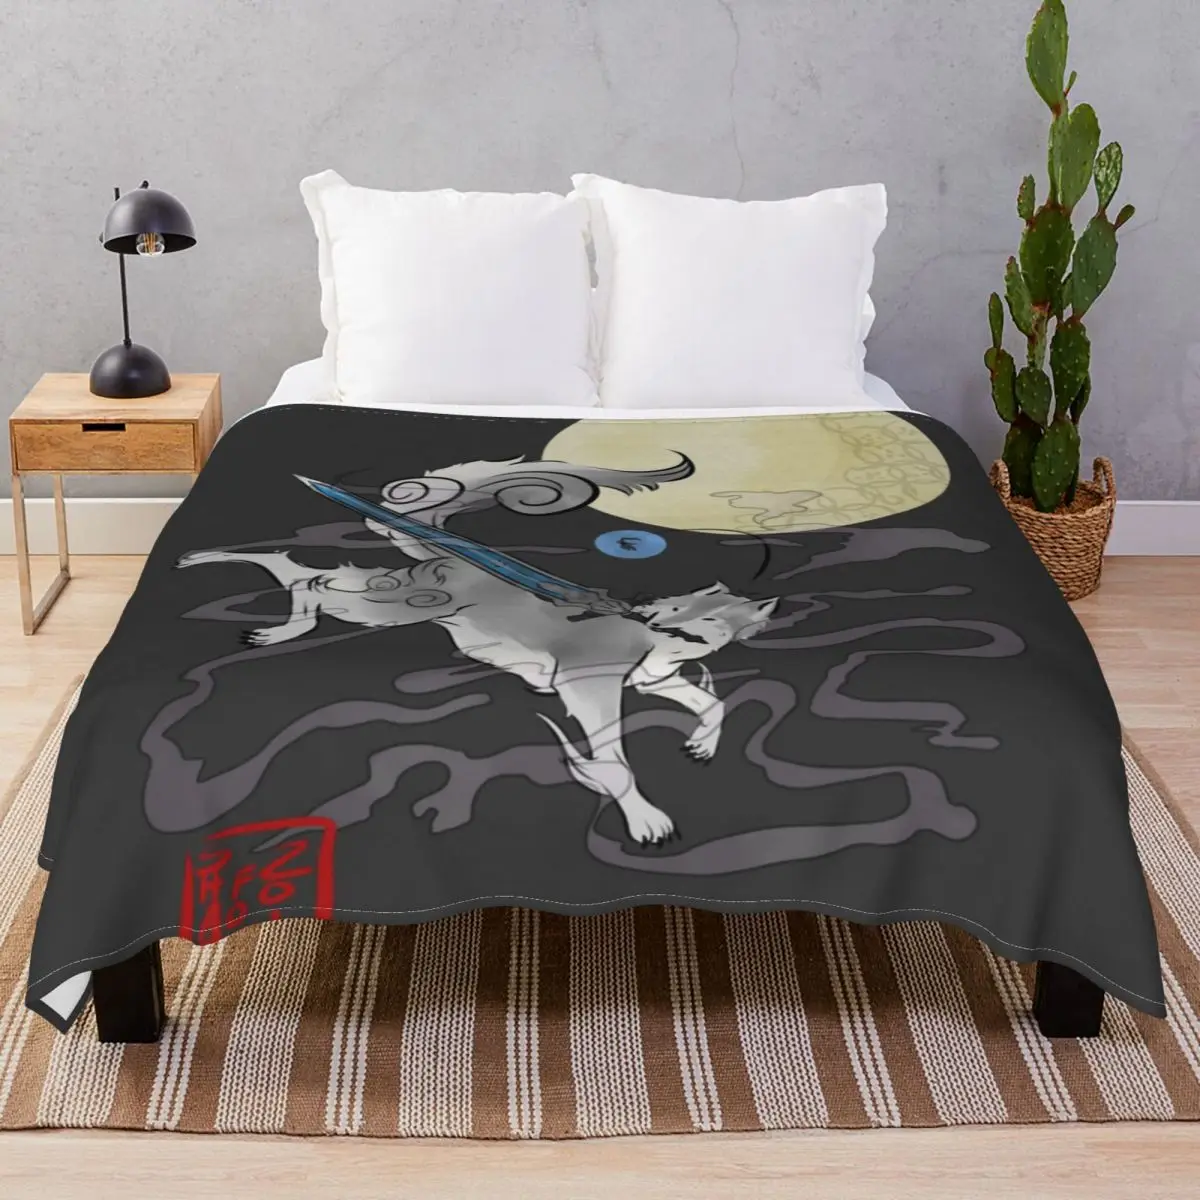 The Great Grey Wolf Sifkami Blankets Fleece Plush Print Comfortable Throw Blanket for Bed Home Couch Camp Cinema